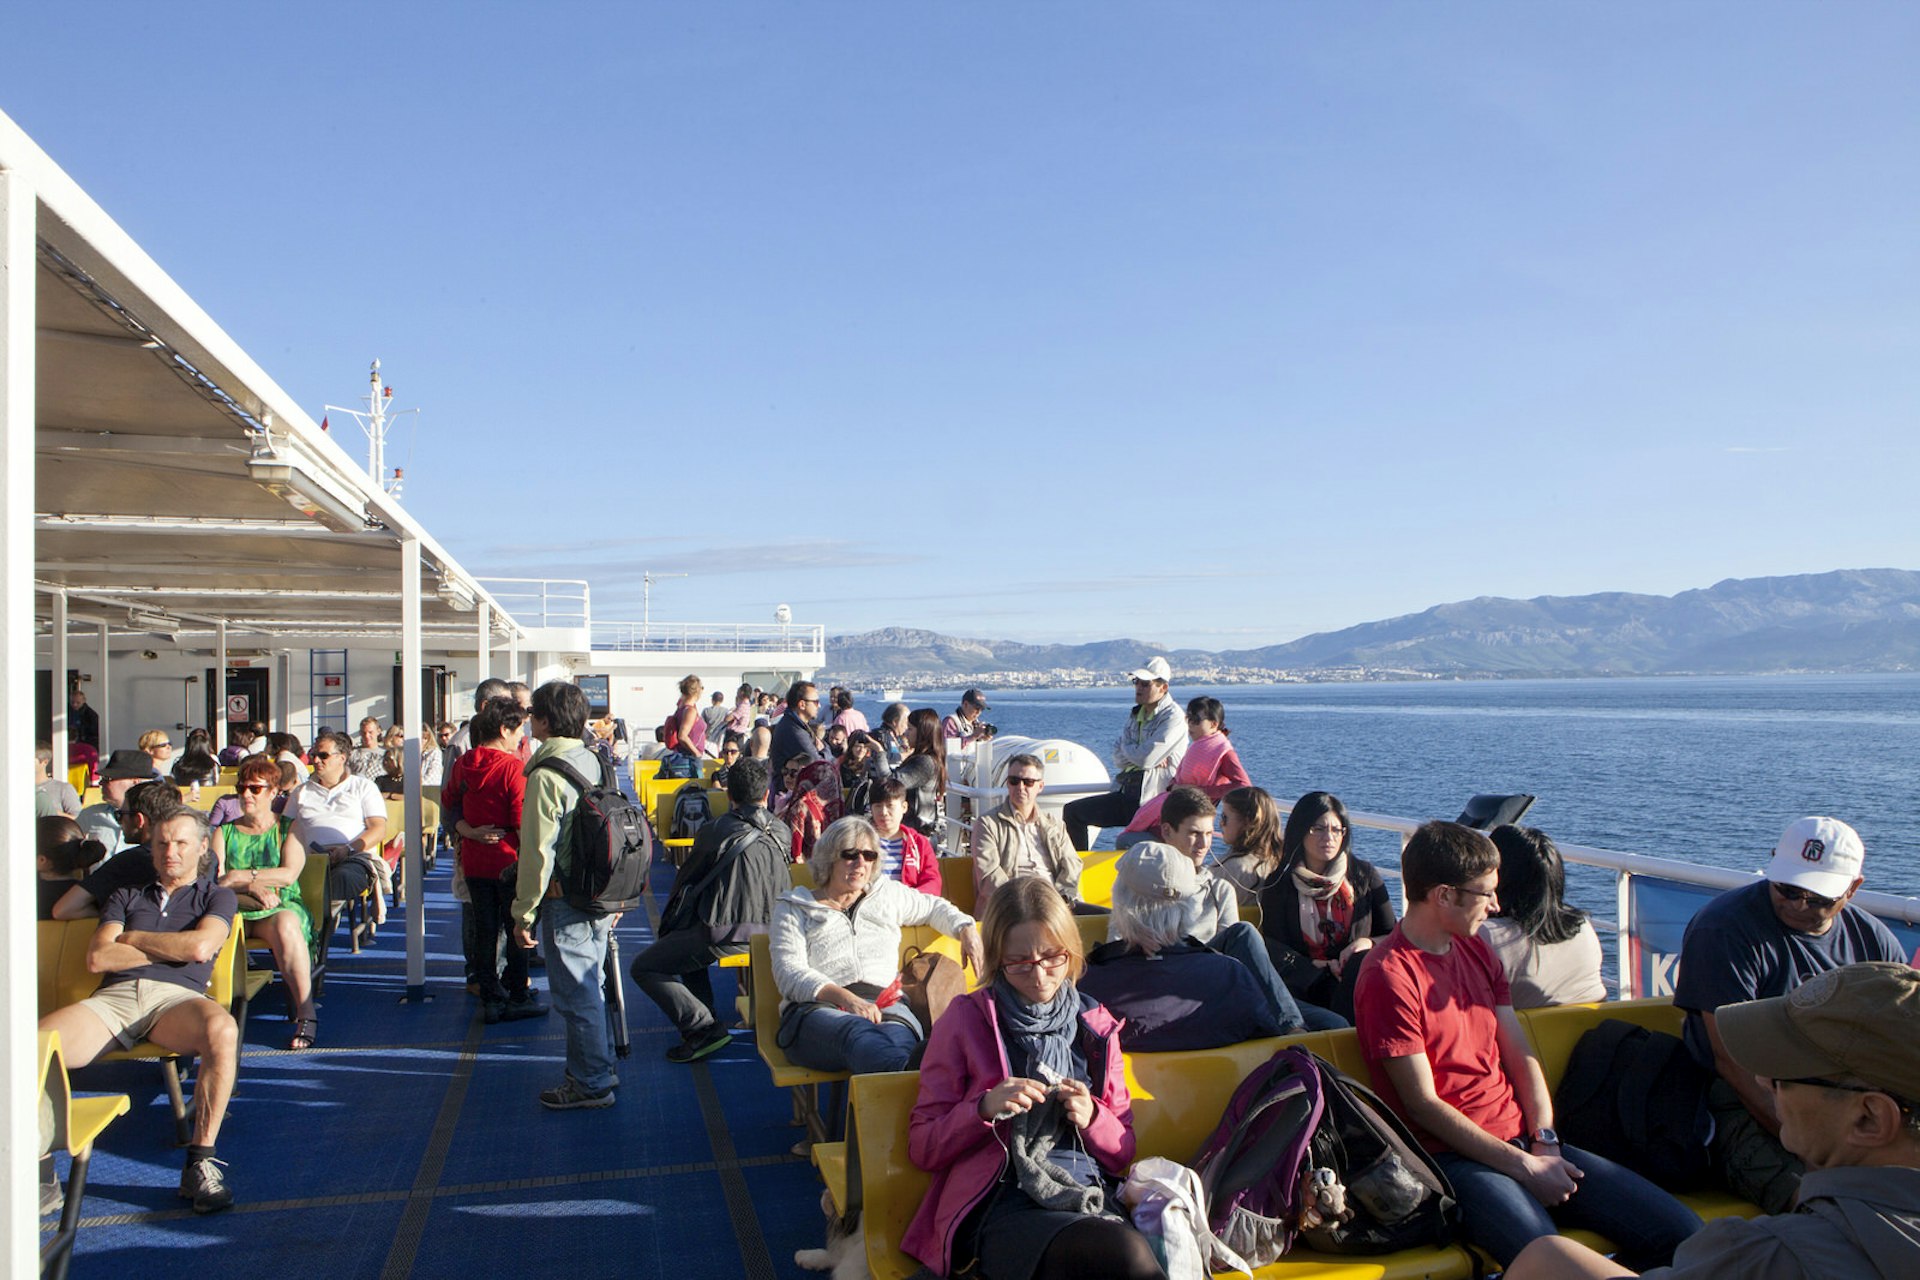 Features - Passengers, Ferry